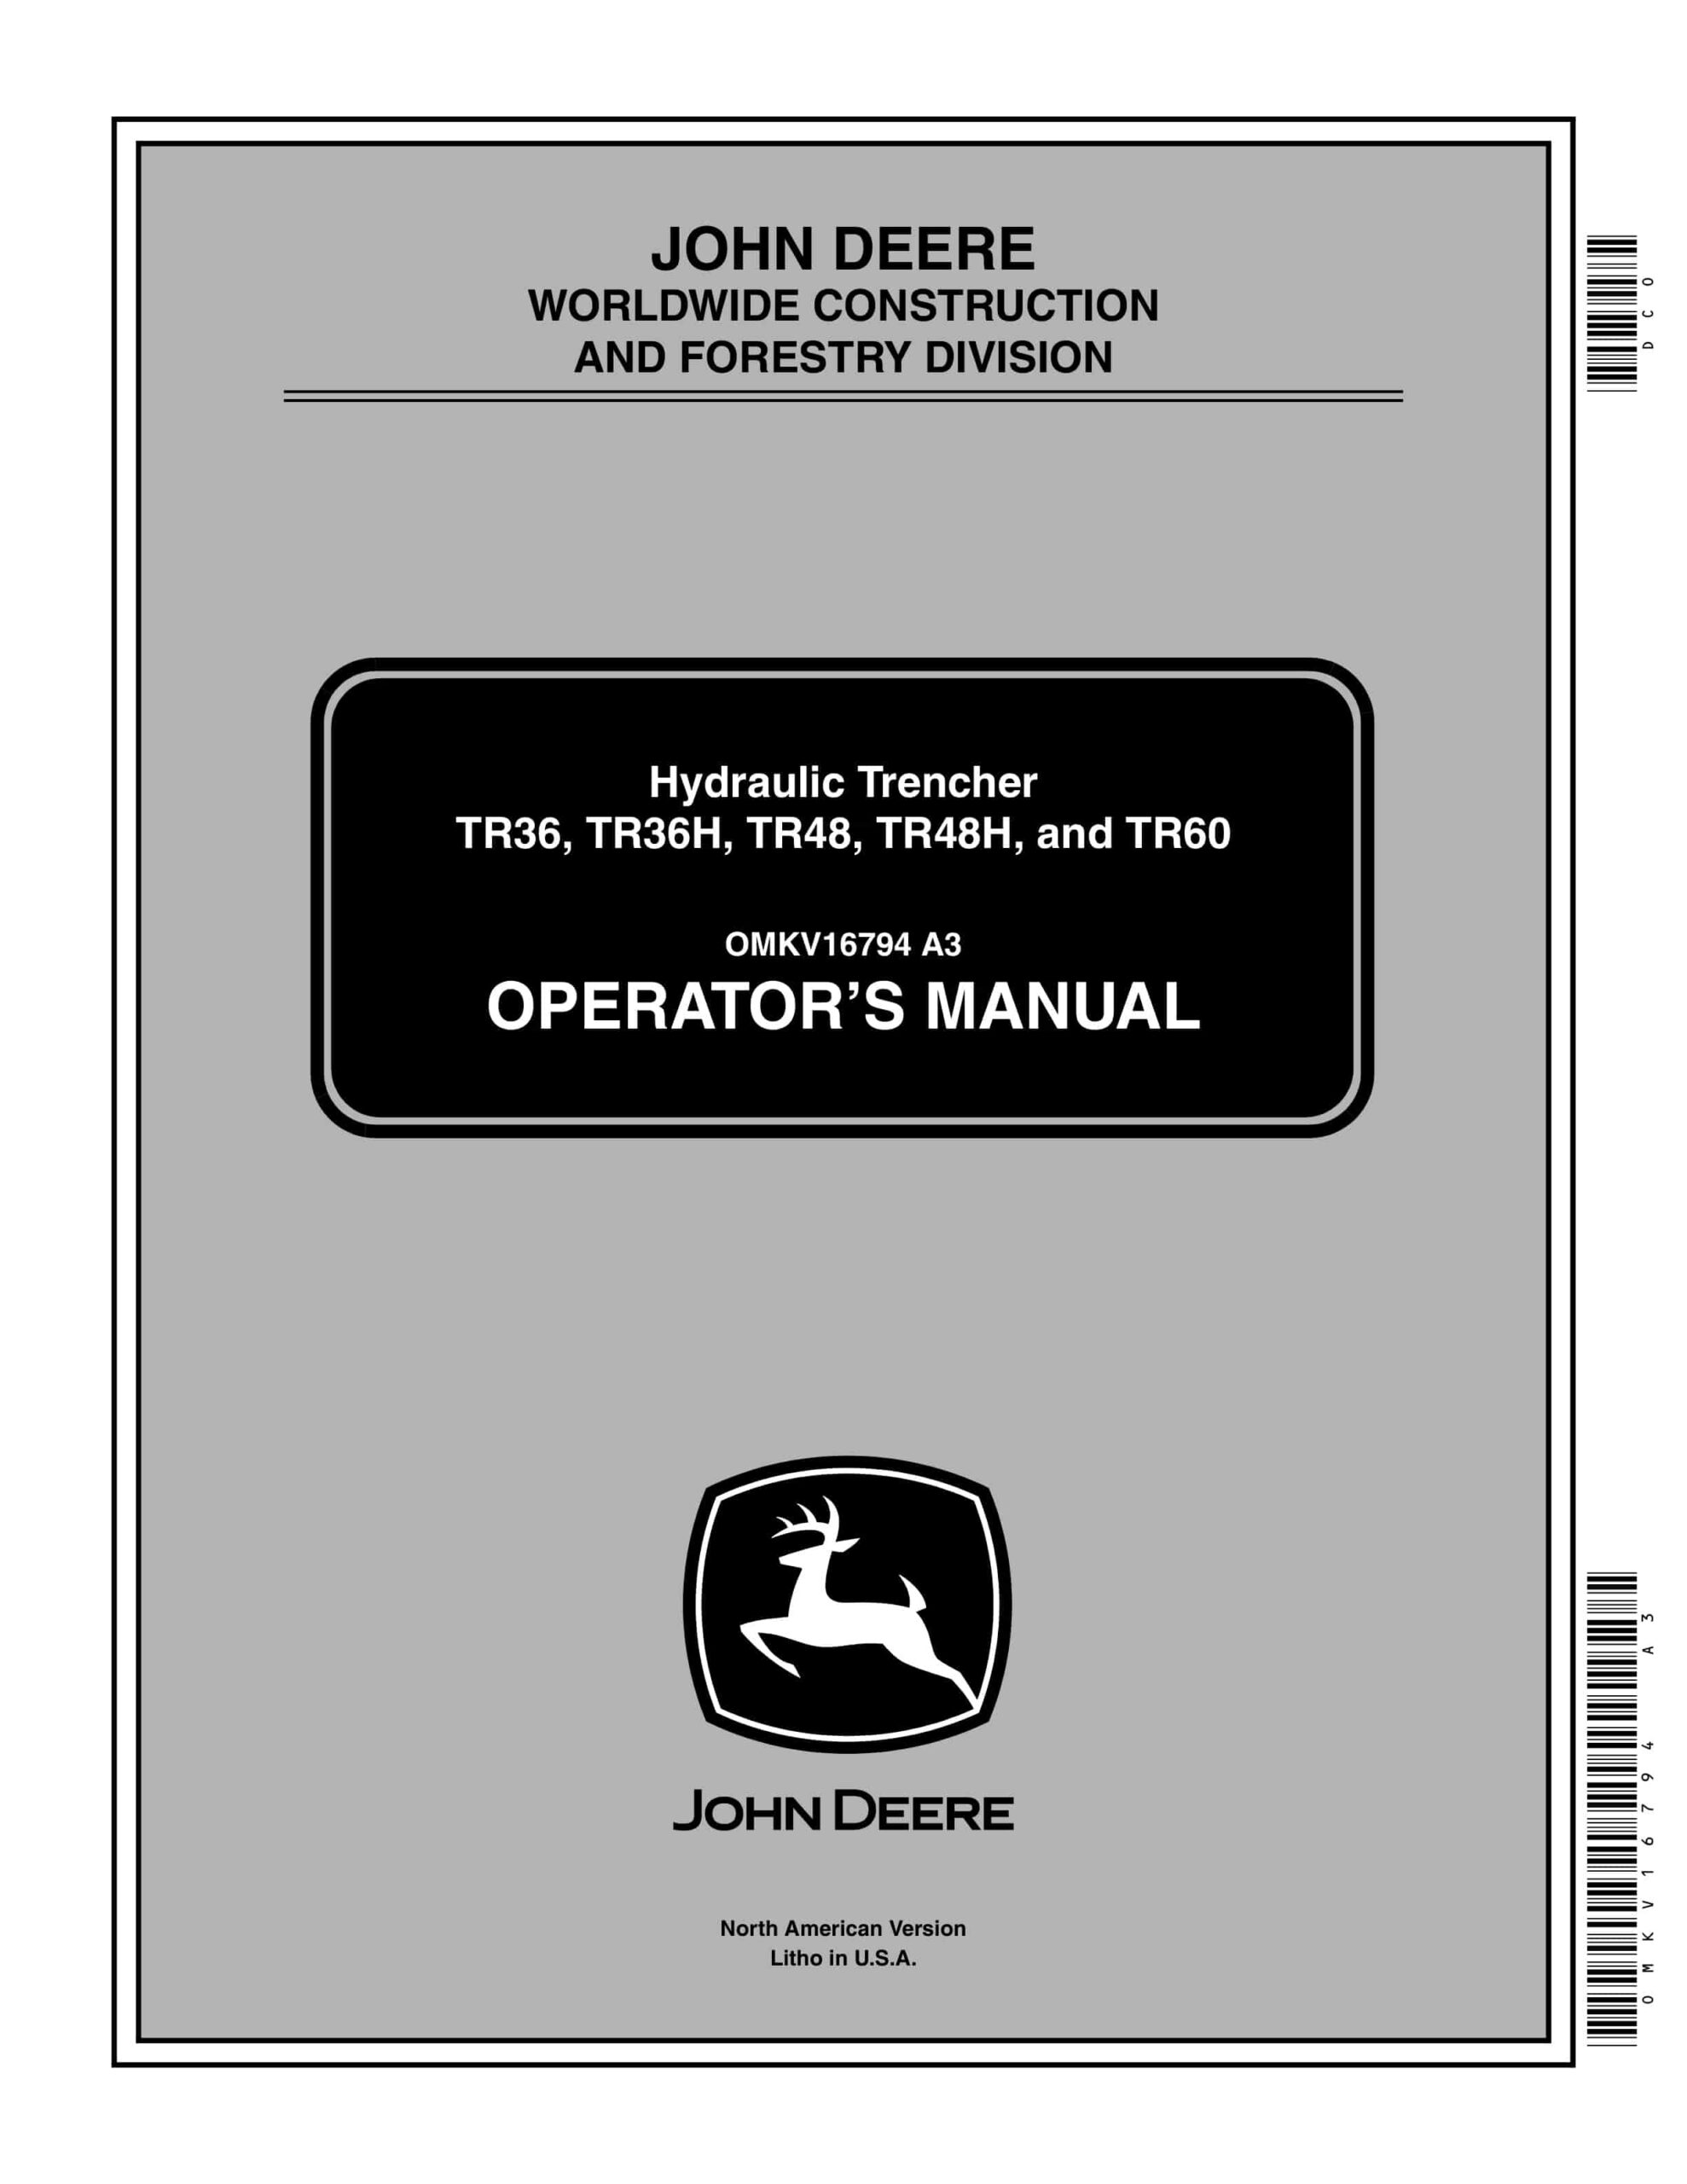 John Deere TR36, TR36H, TR48, TR48H, and TR60 Hydraulic Trencher Operator Manual OMKV16794-1